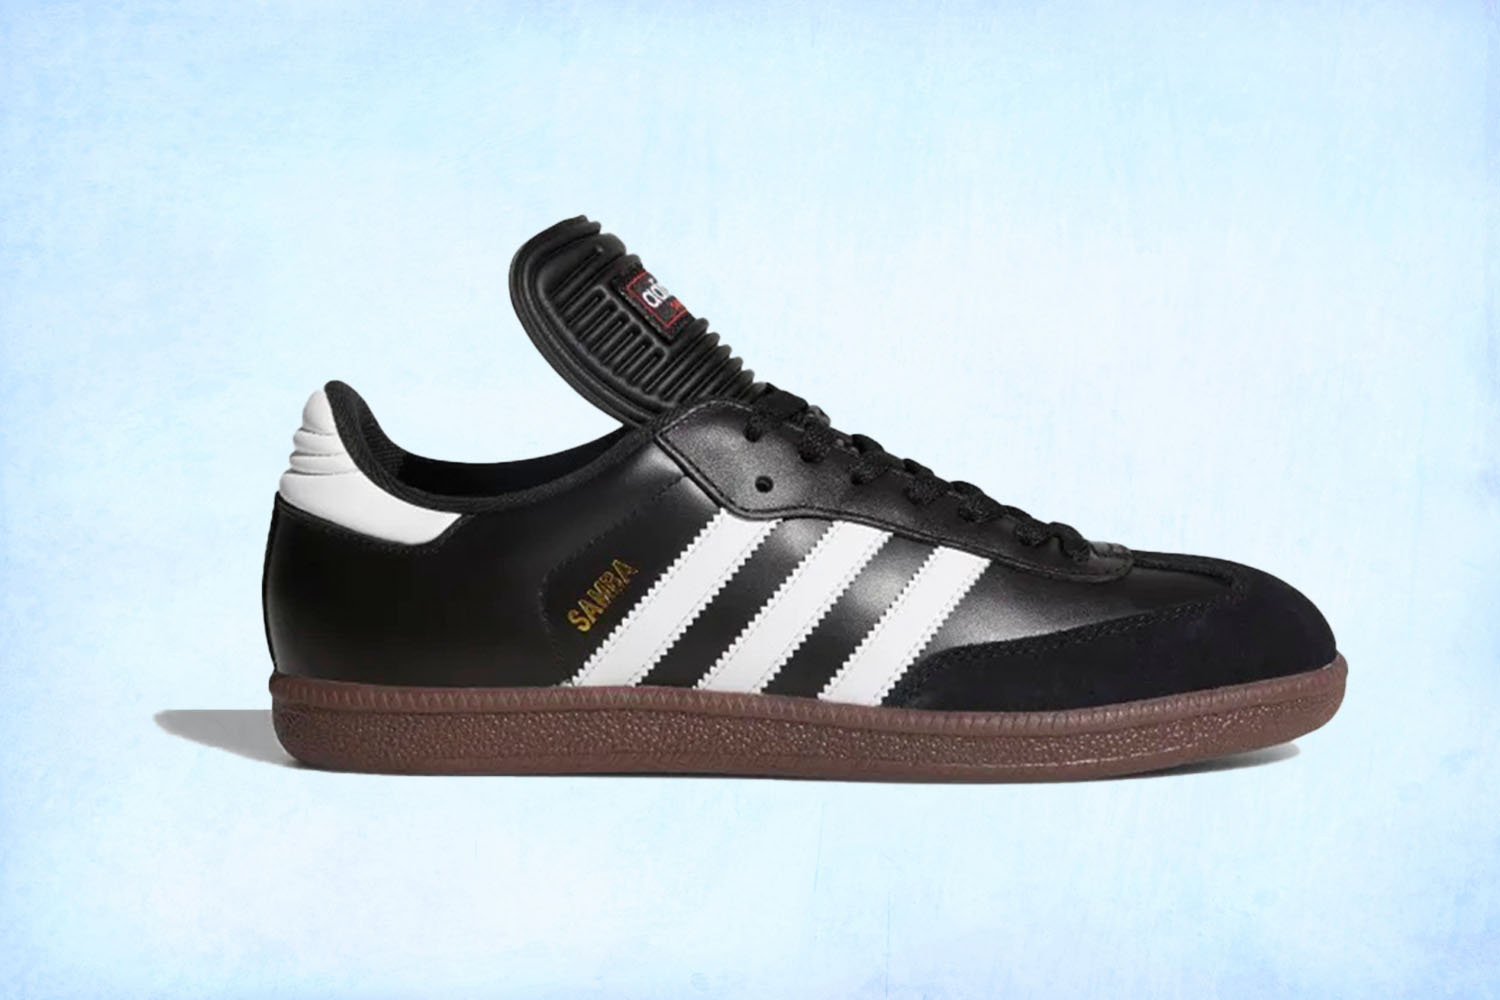 Adidas Styles: Your Shoe Guide From Samba to Superstar -